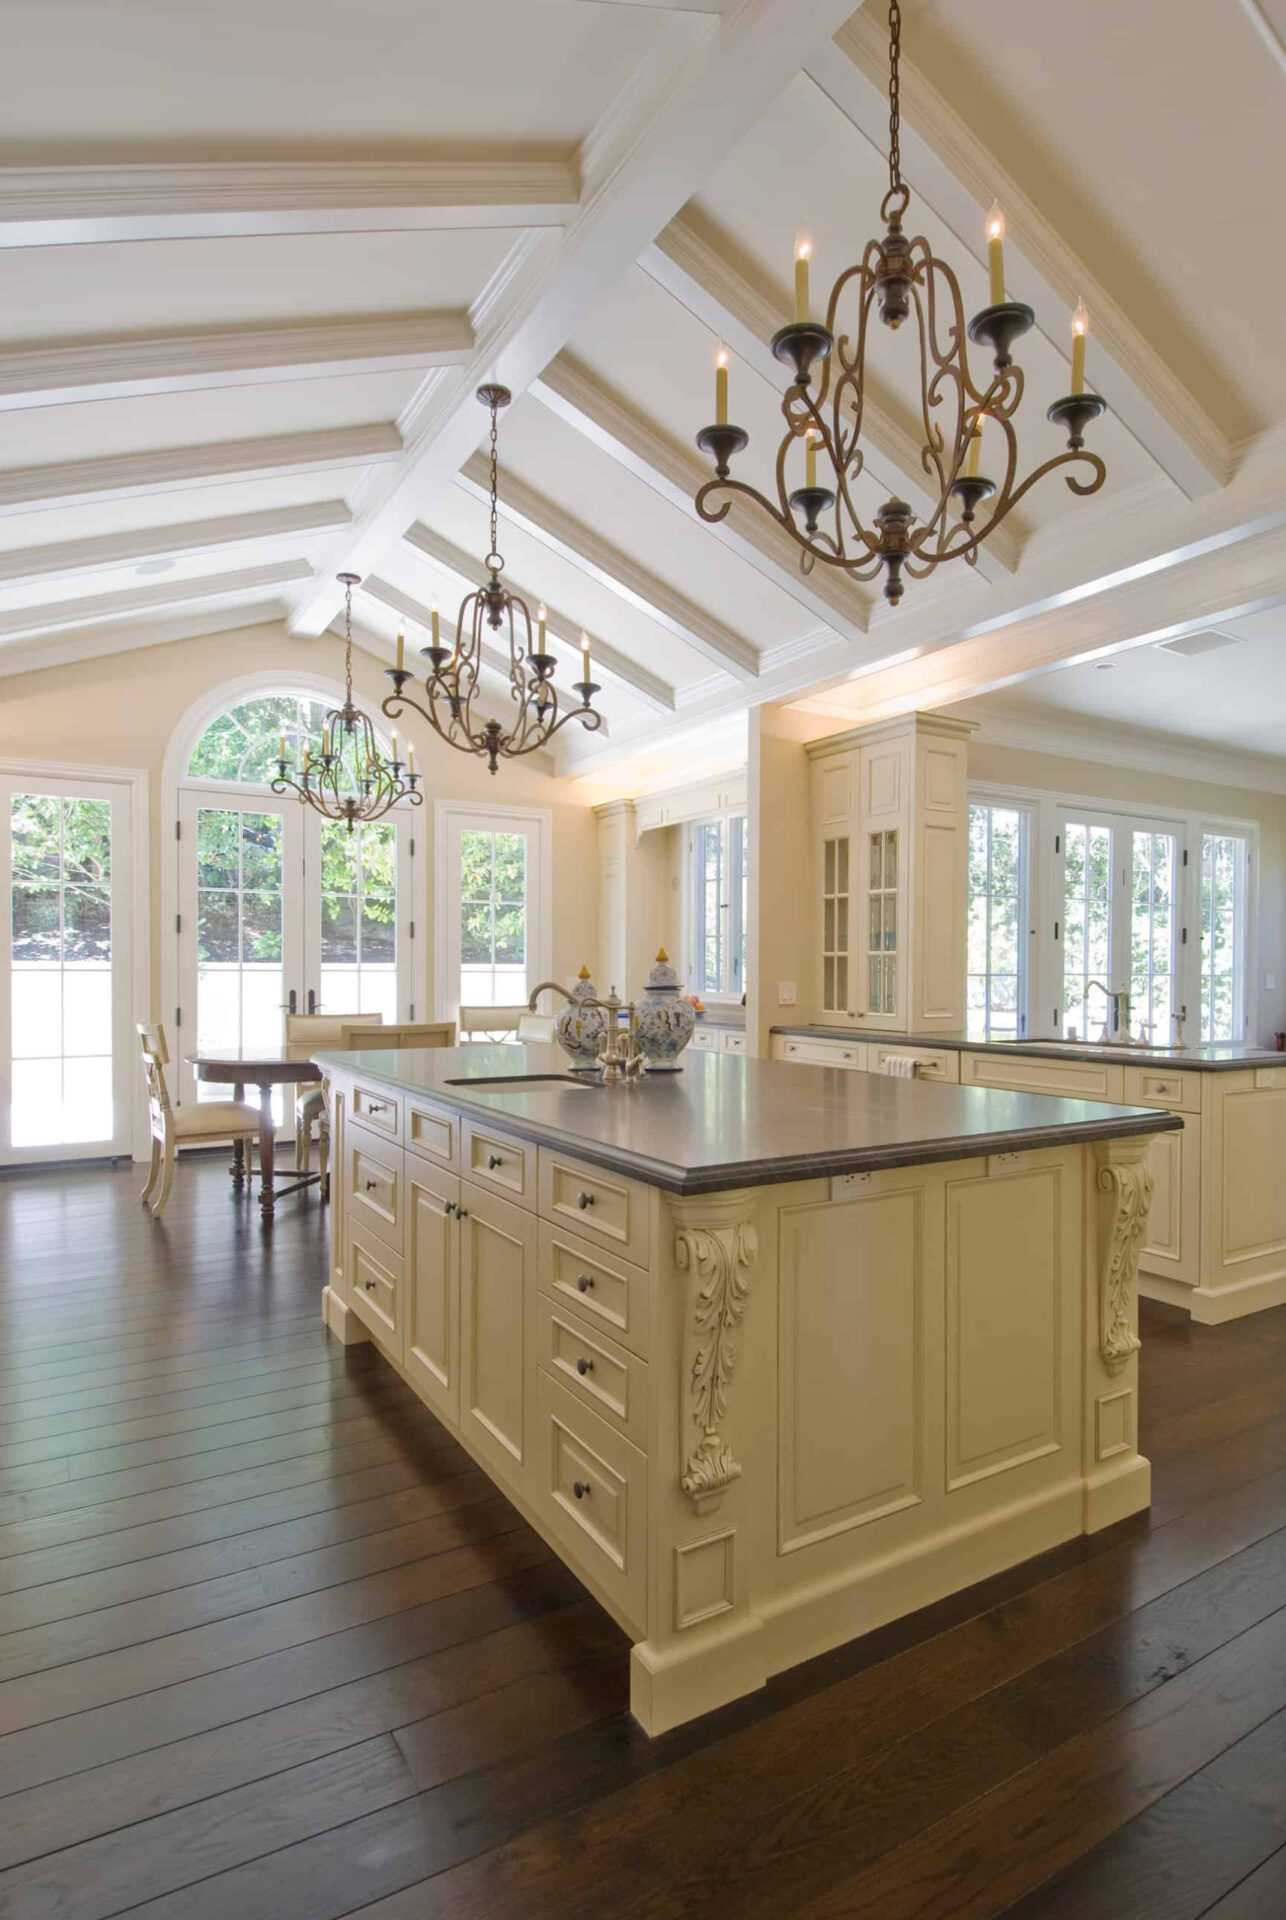 Ornate kitchen with large island and dark wood floors.